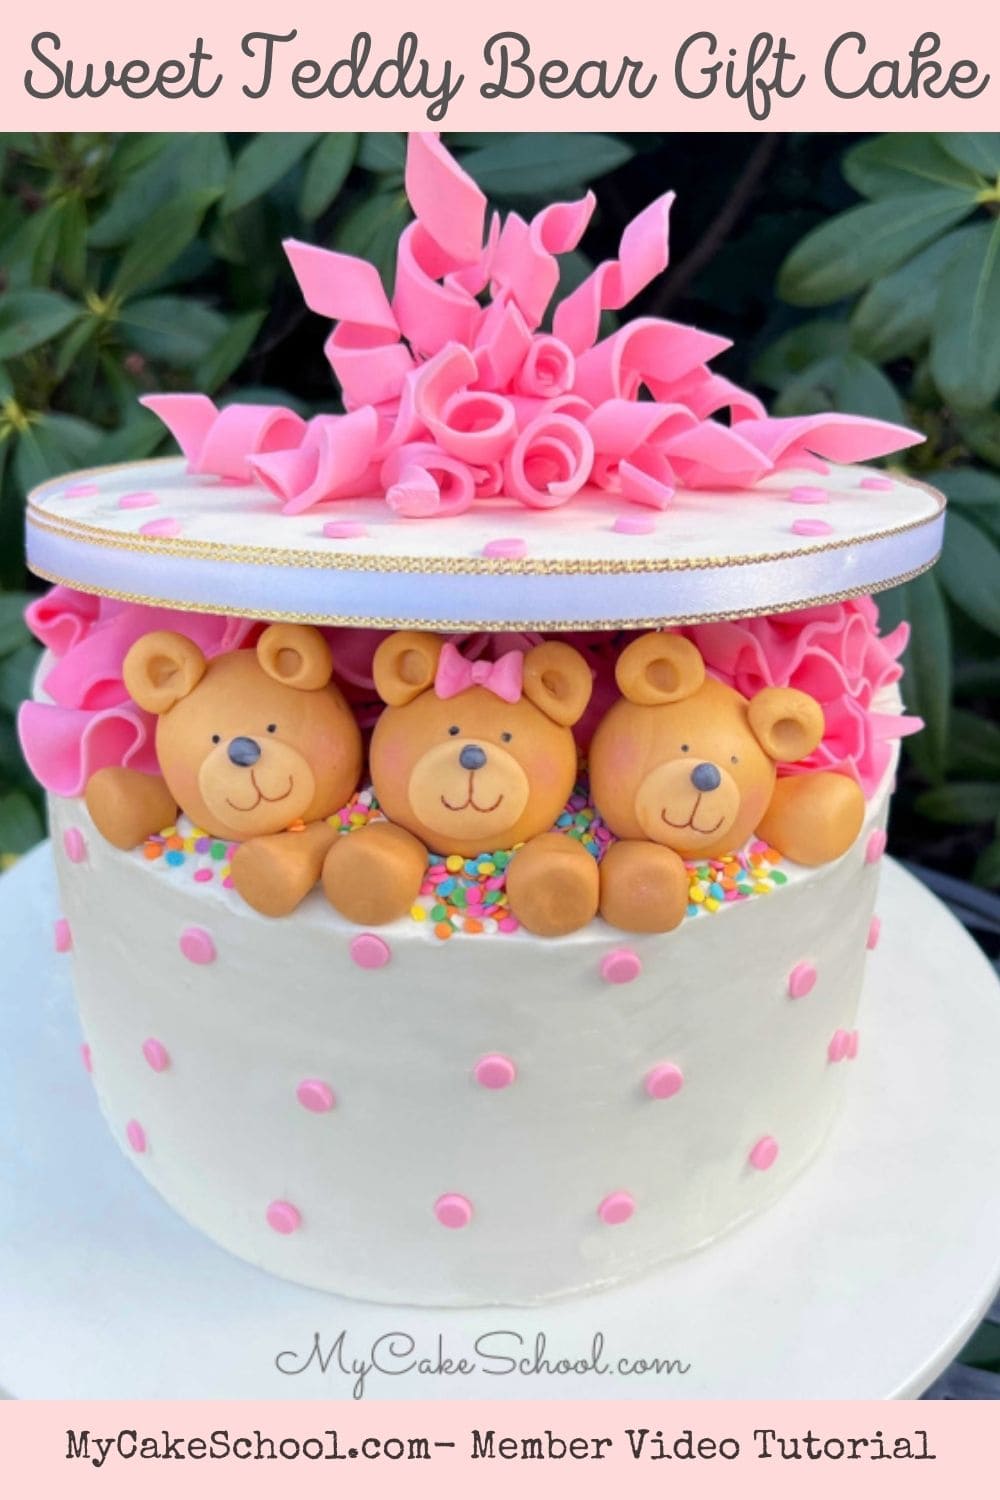 Teddy Bear Gift Cake- So cute for baby showers and young birthdays! (From My Cake School's Member Section)